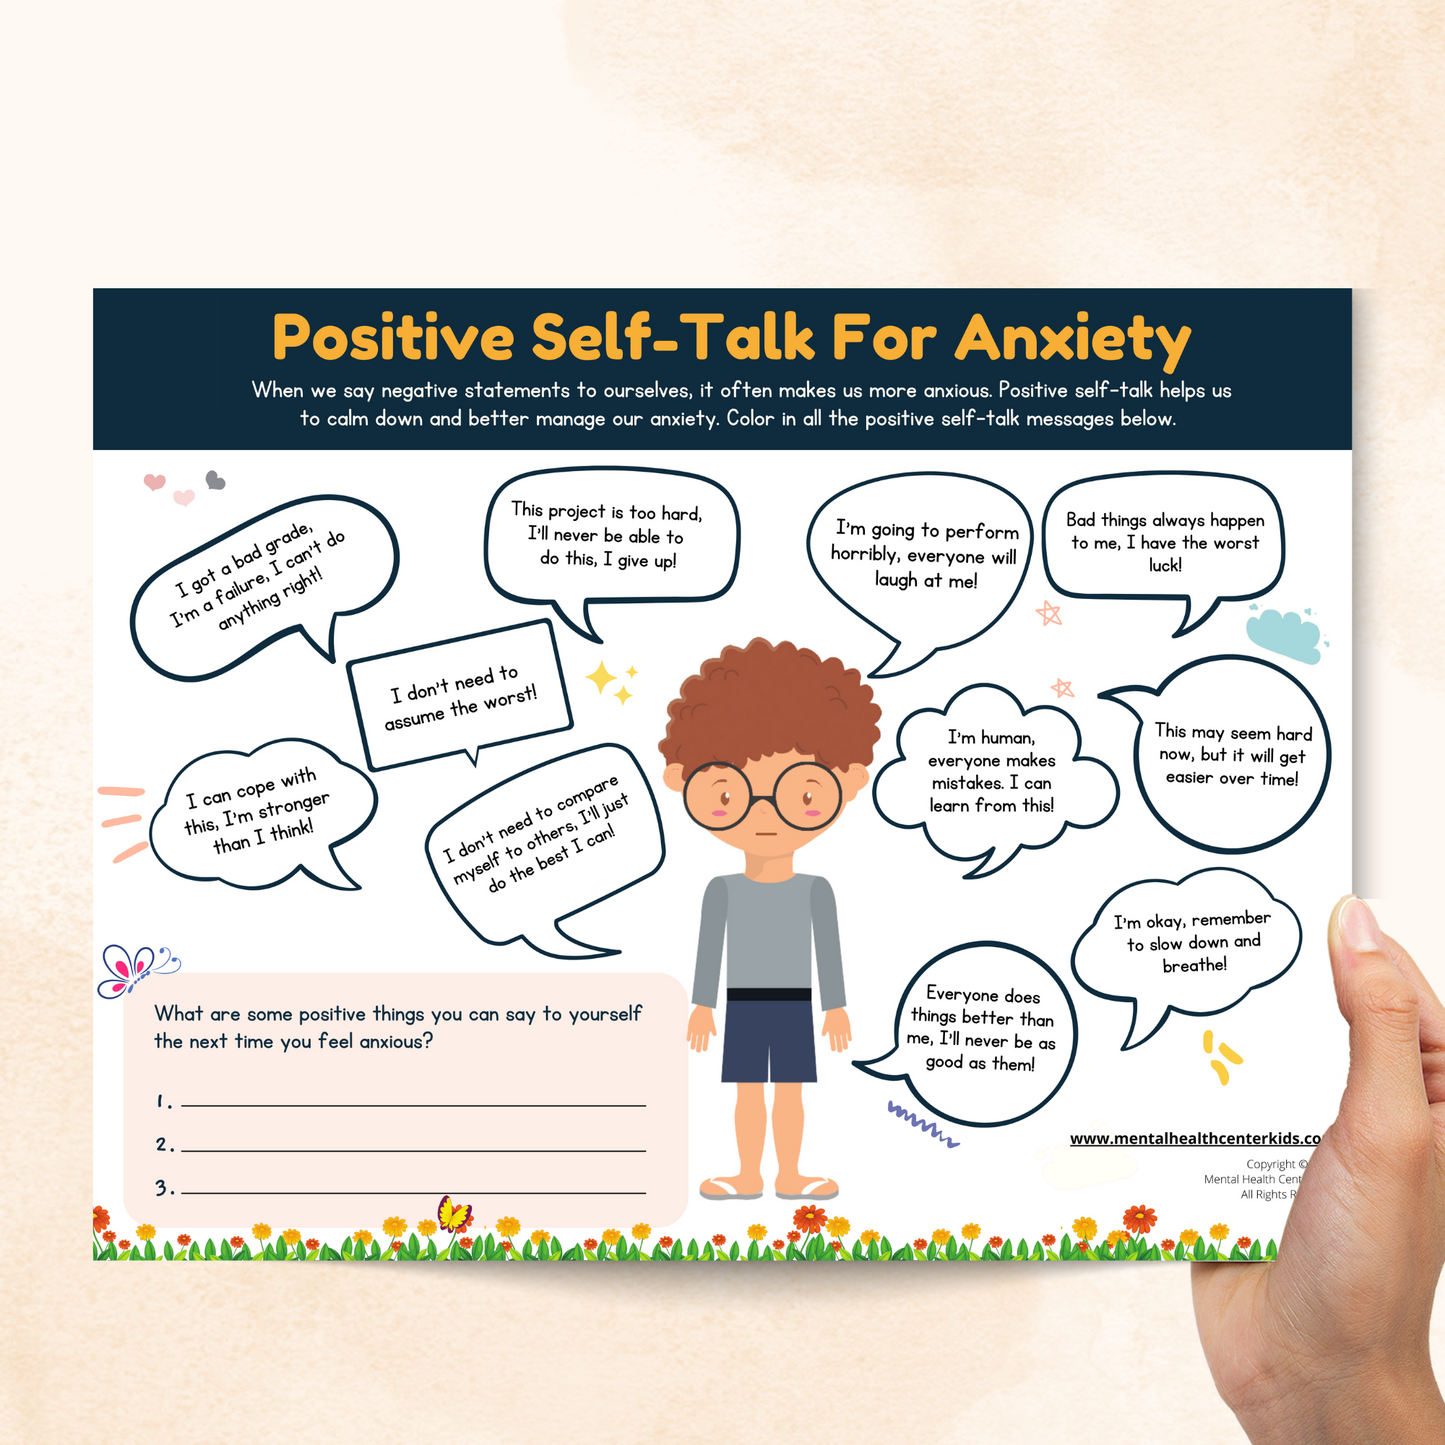 Positive Self-Talk for Anxiety